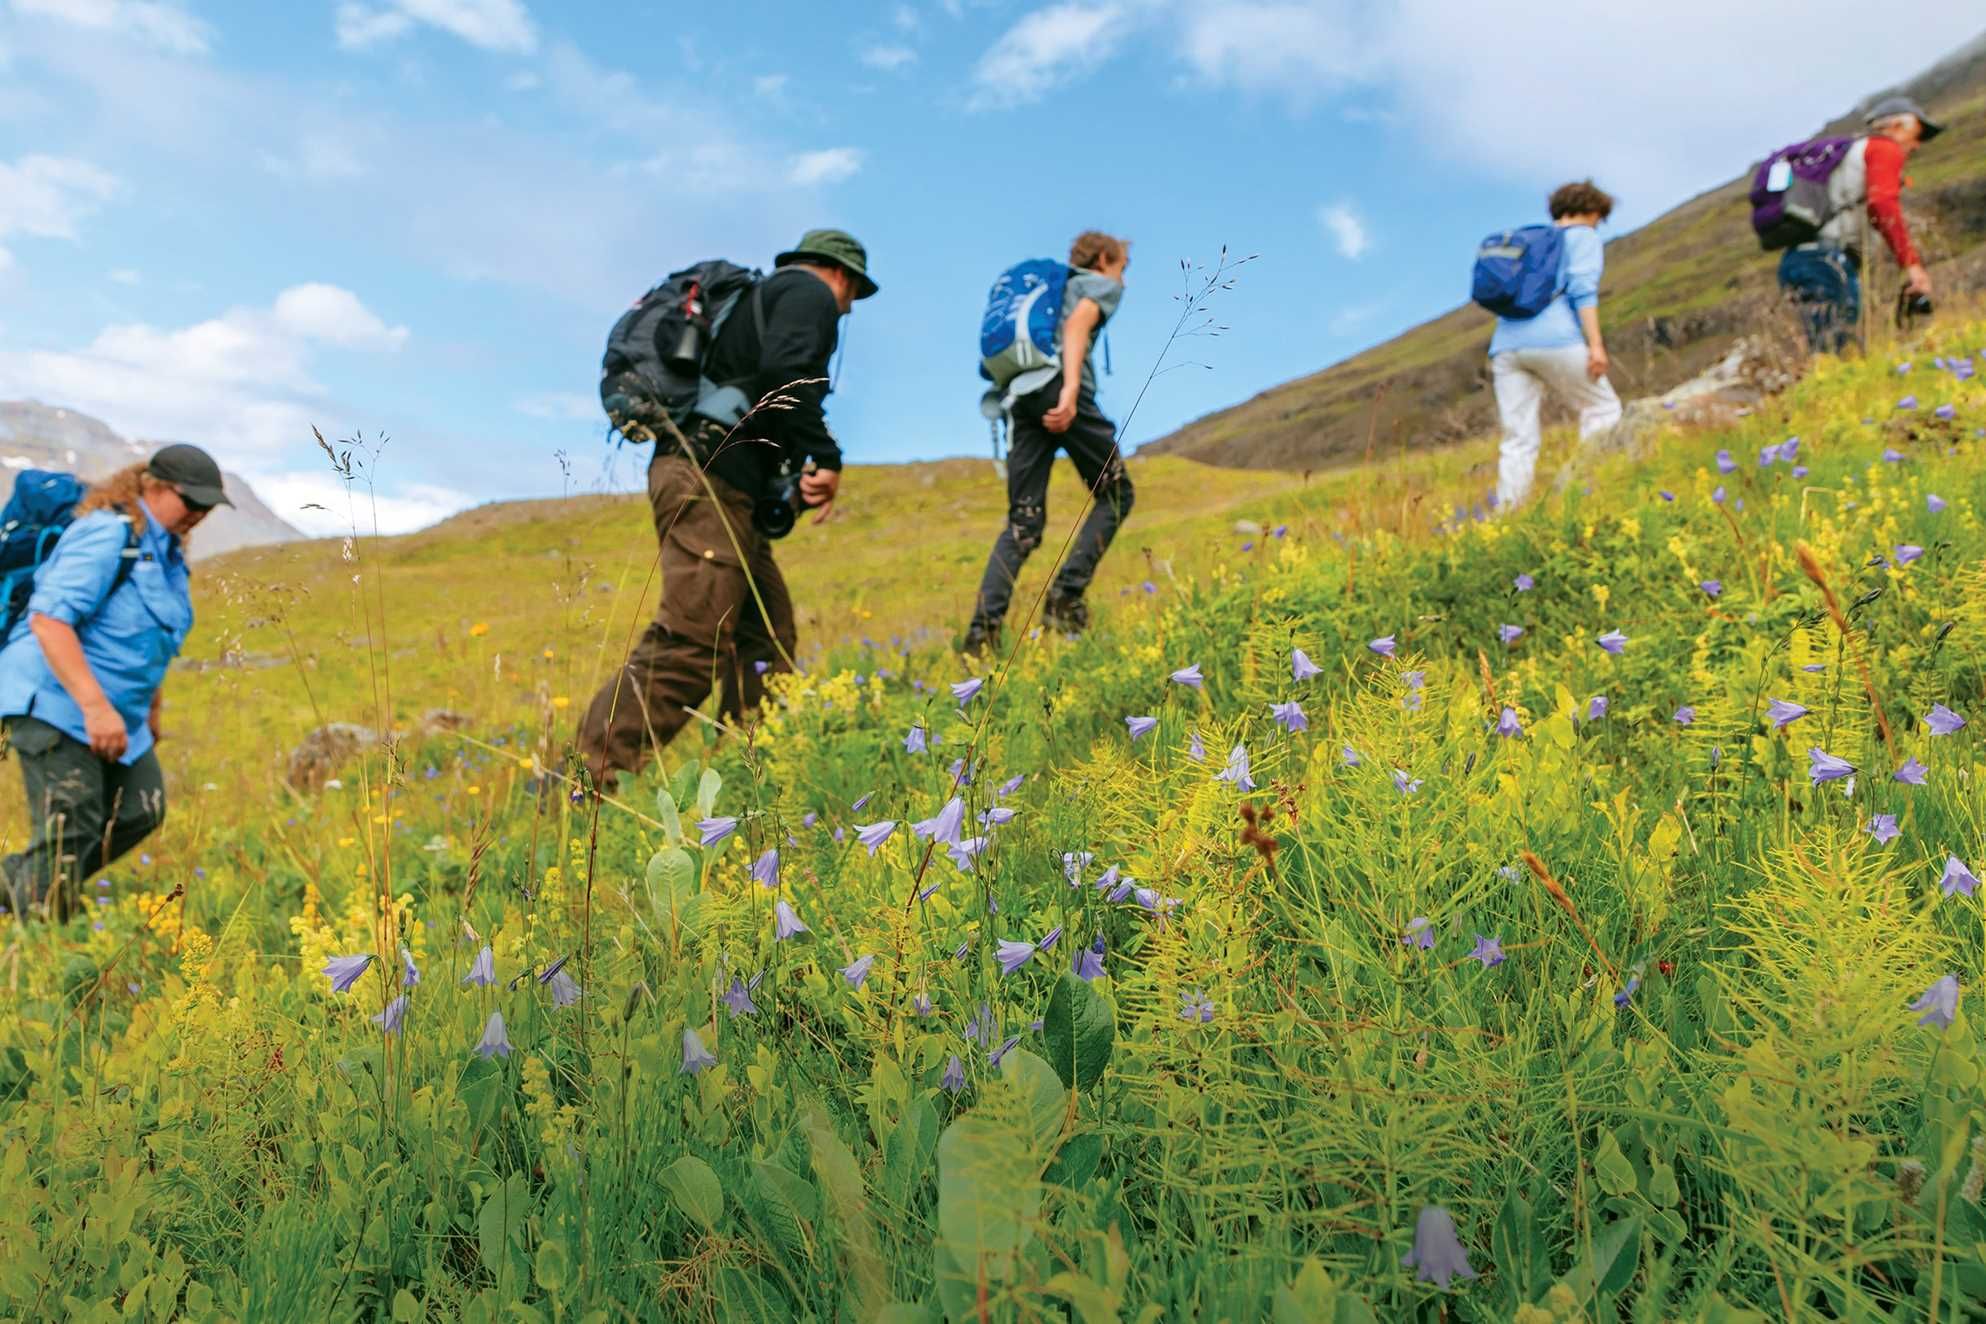 Save 5% on group travel with Lindblad Expeditions